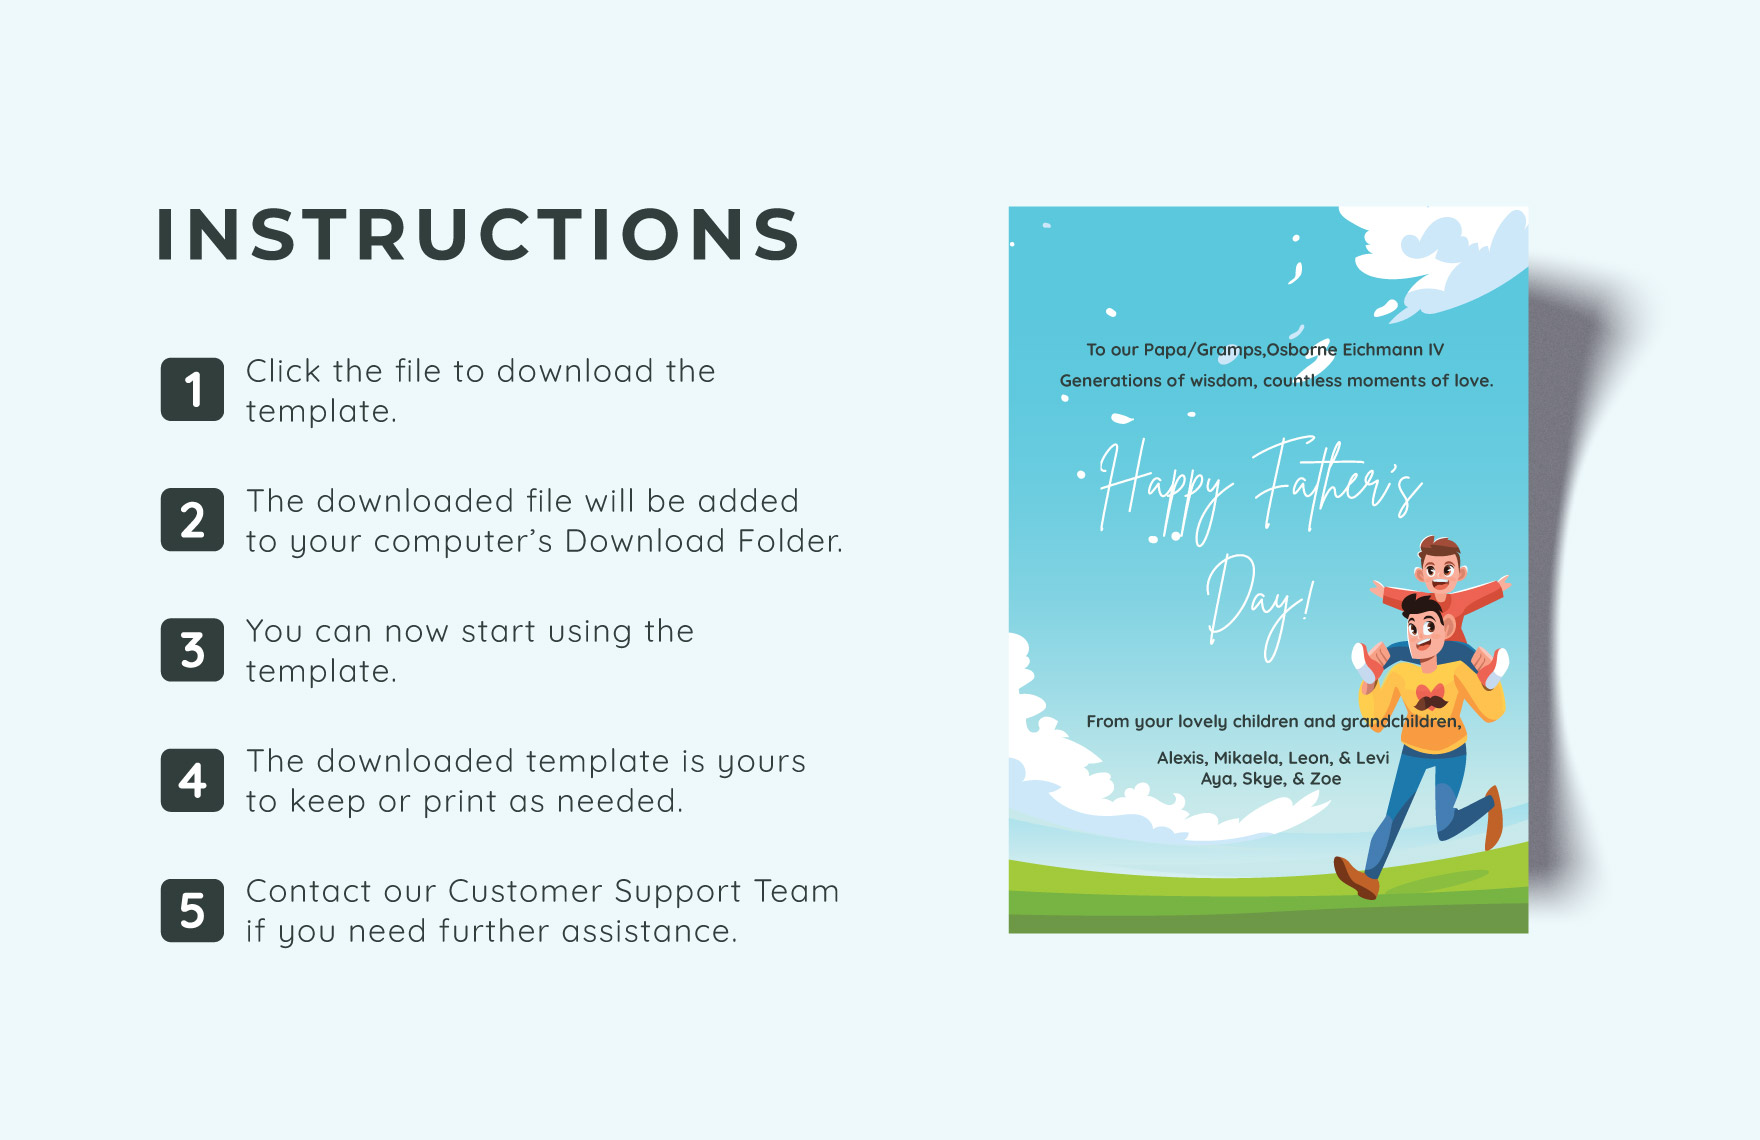 Father's Day Greeting Card Template